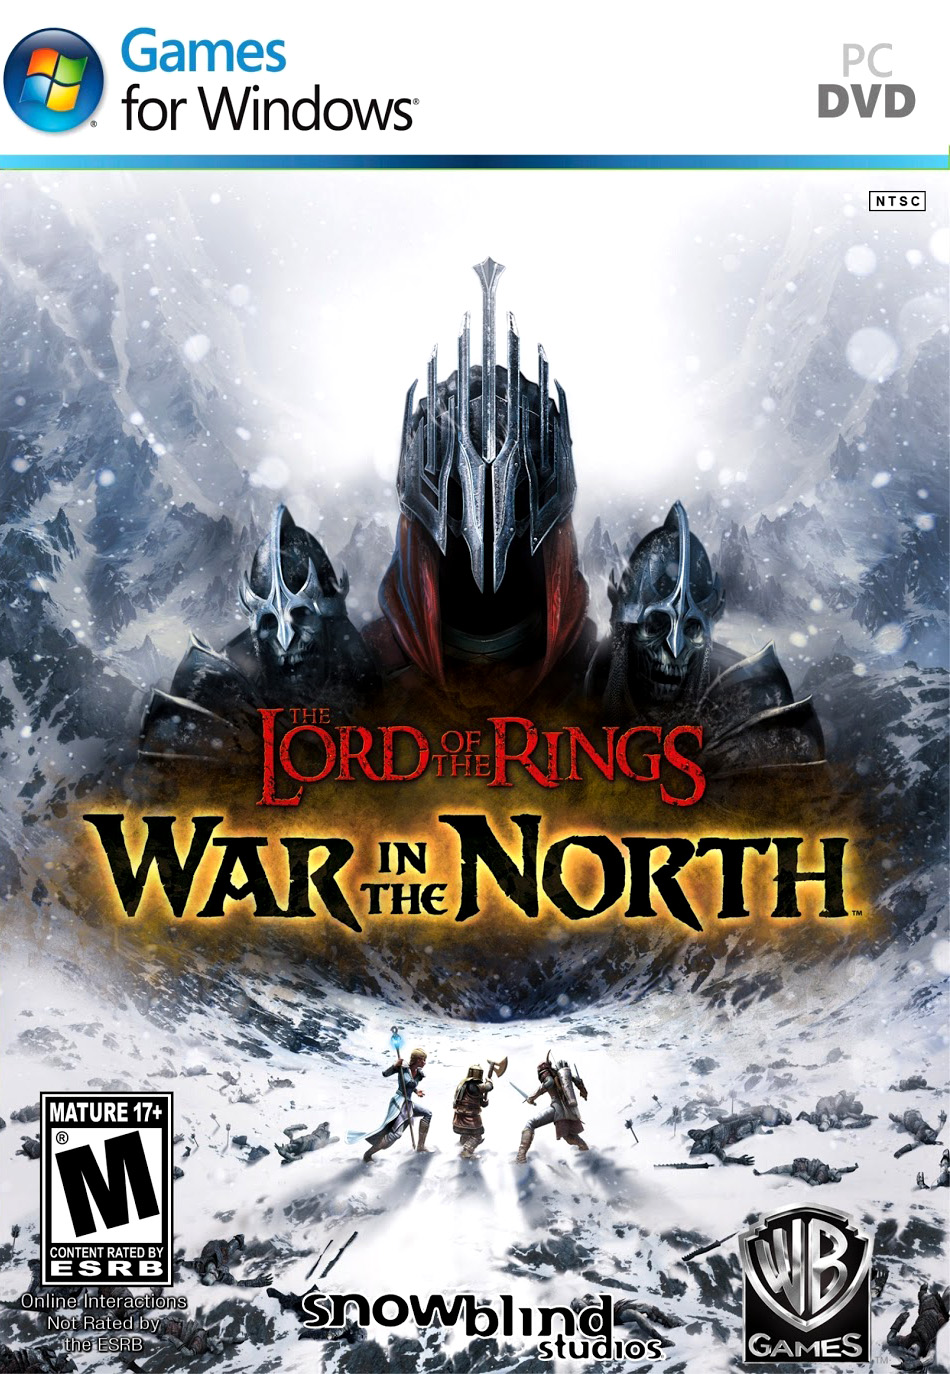 Lord of the rings war in the north купить steam фото 42